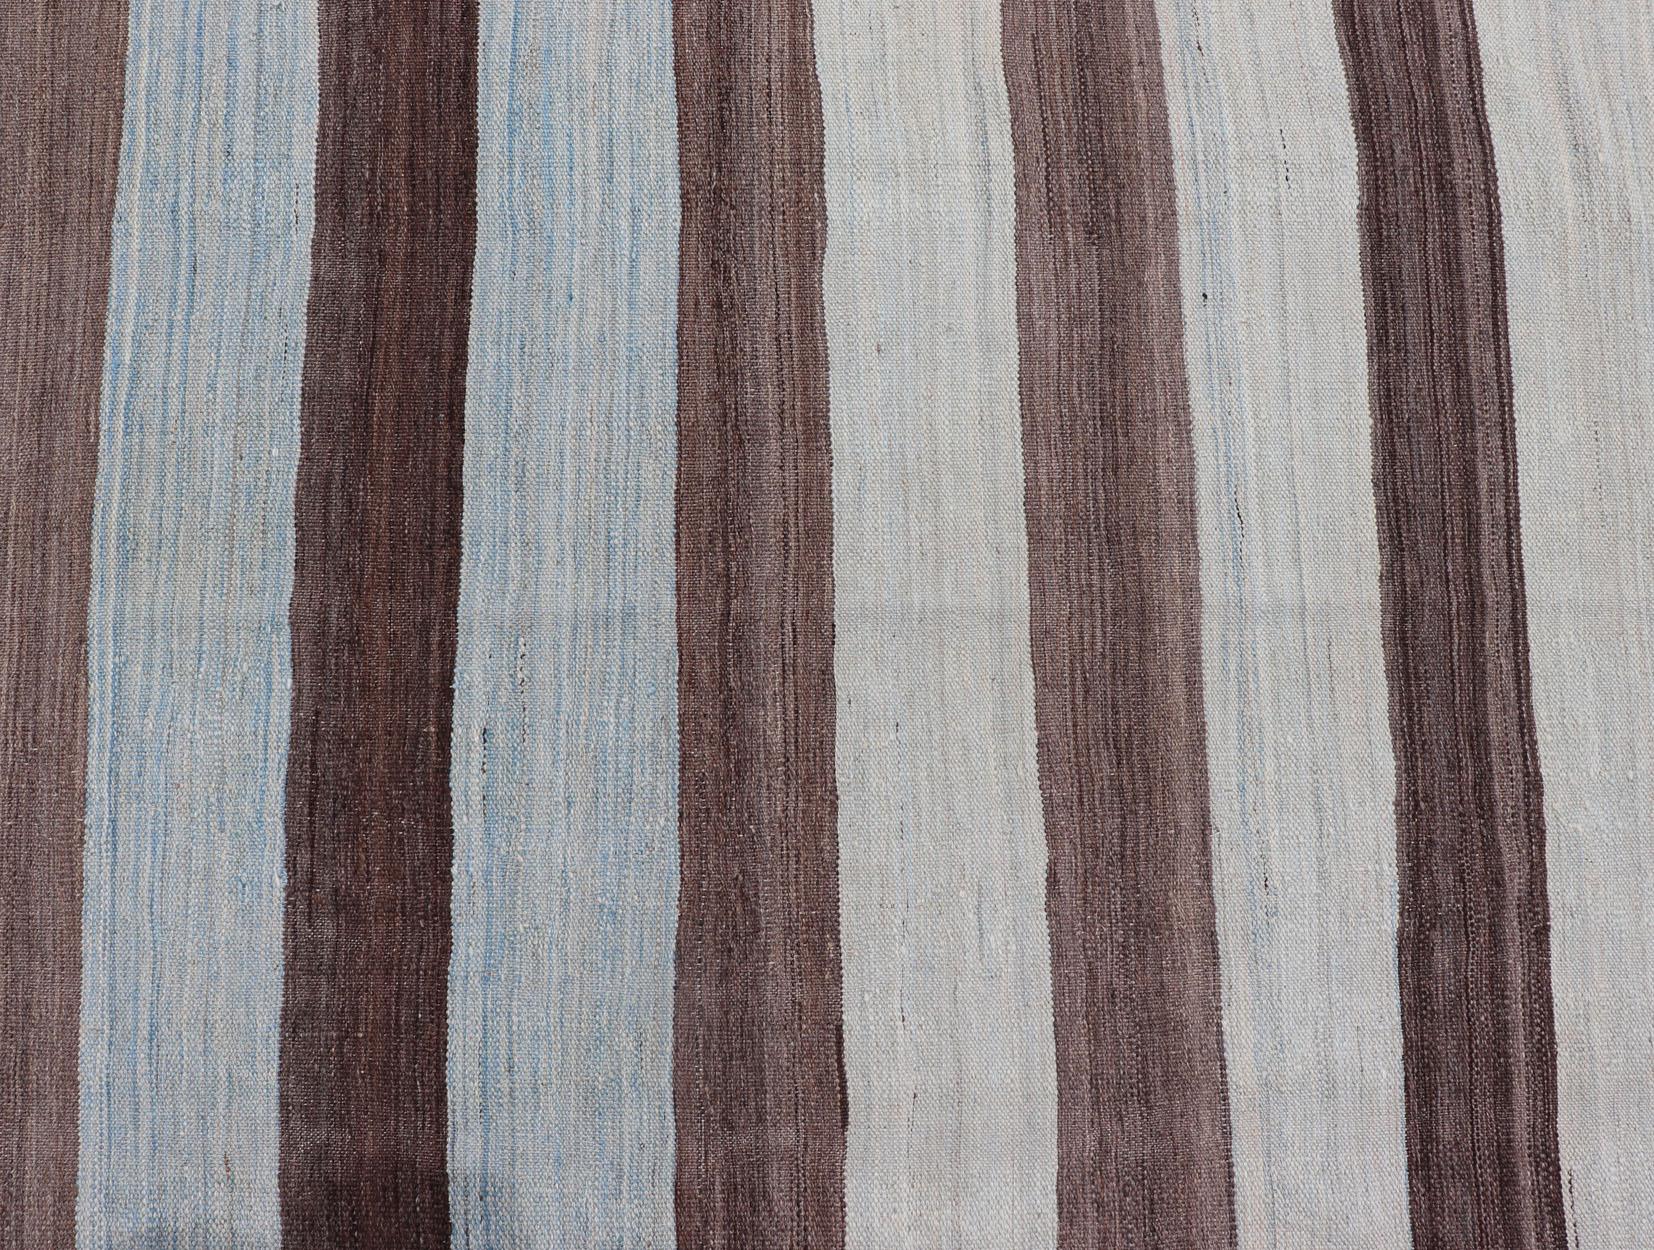 Modern Kilim Hand Woven Casual Rug with Stripes in Shades of Blue and Brown For Sale 3